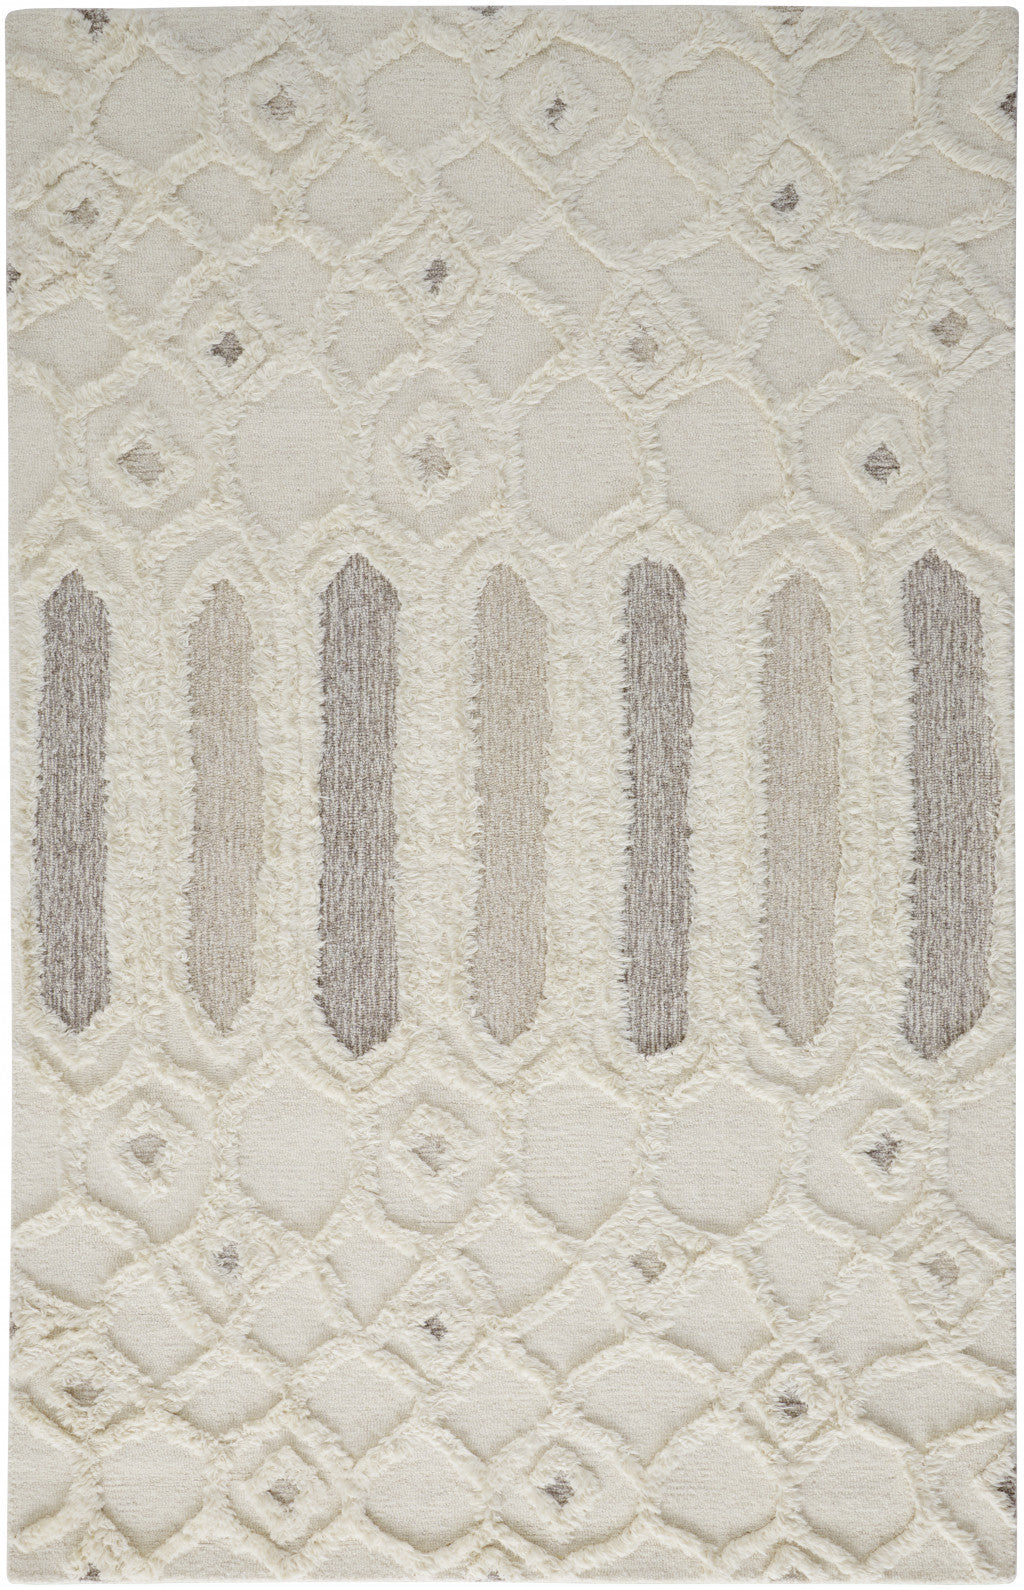 4' X 6' Ivory Taupe And Tan Wool Geometric Tufted Handmade Stain Resistant Area Rug